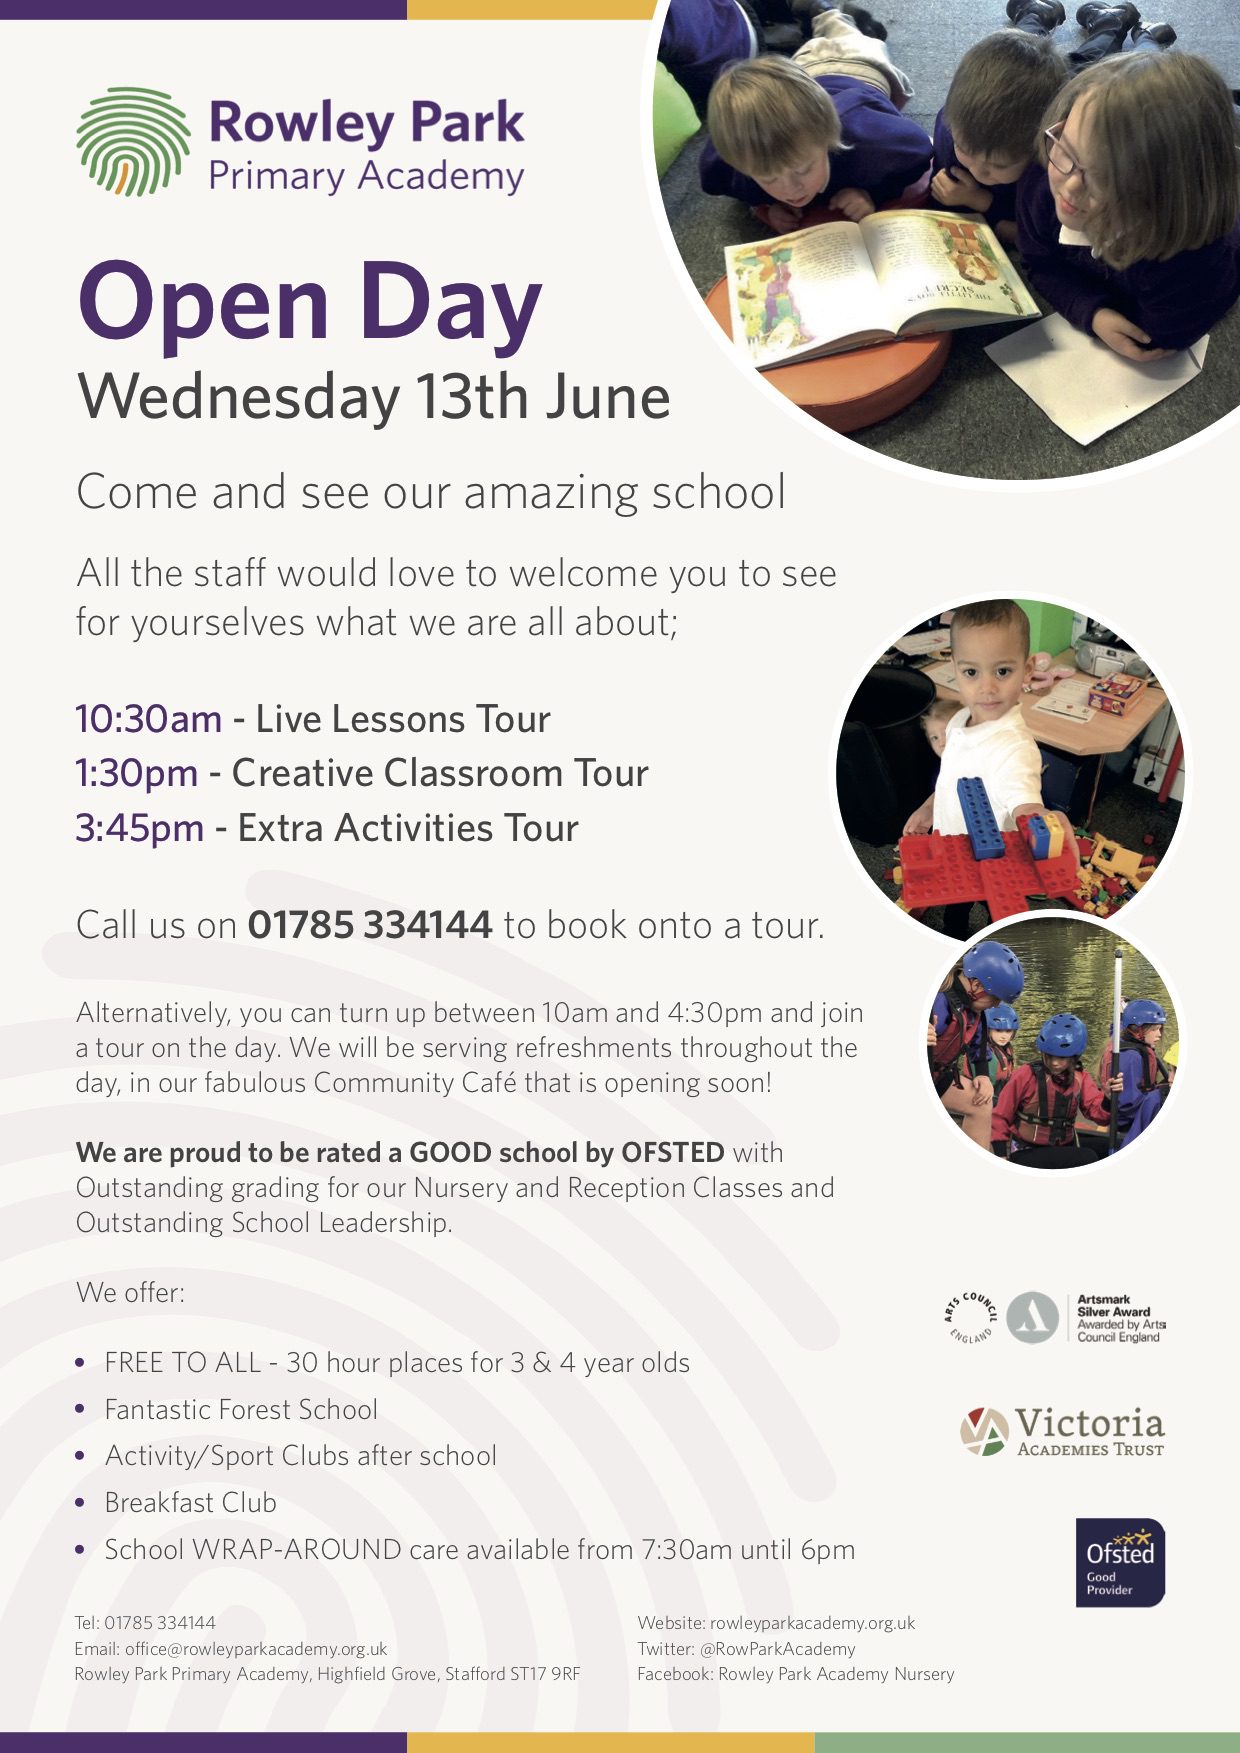 School Open Day Poster, Wednesday 13th June 2018